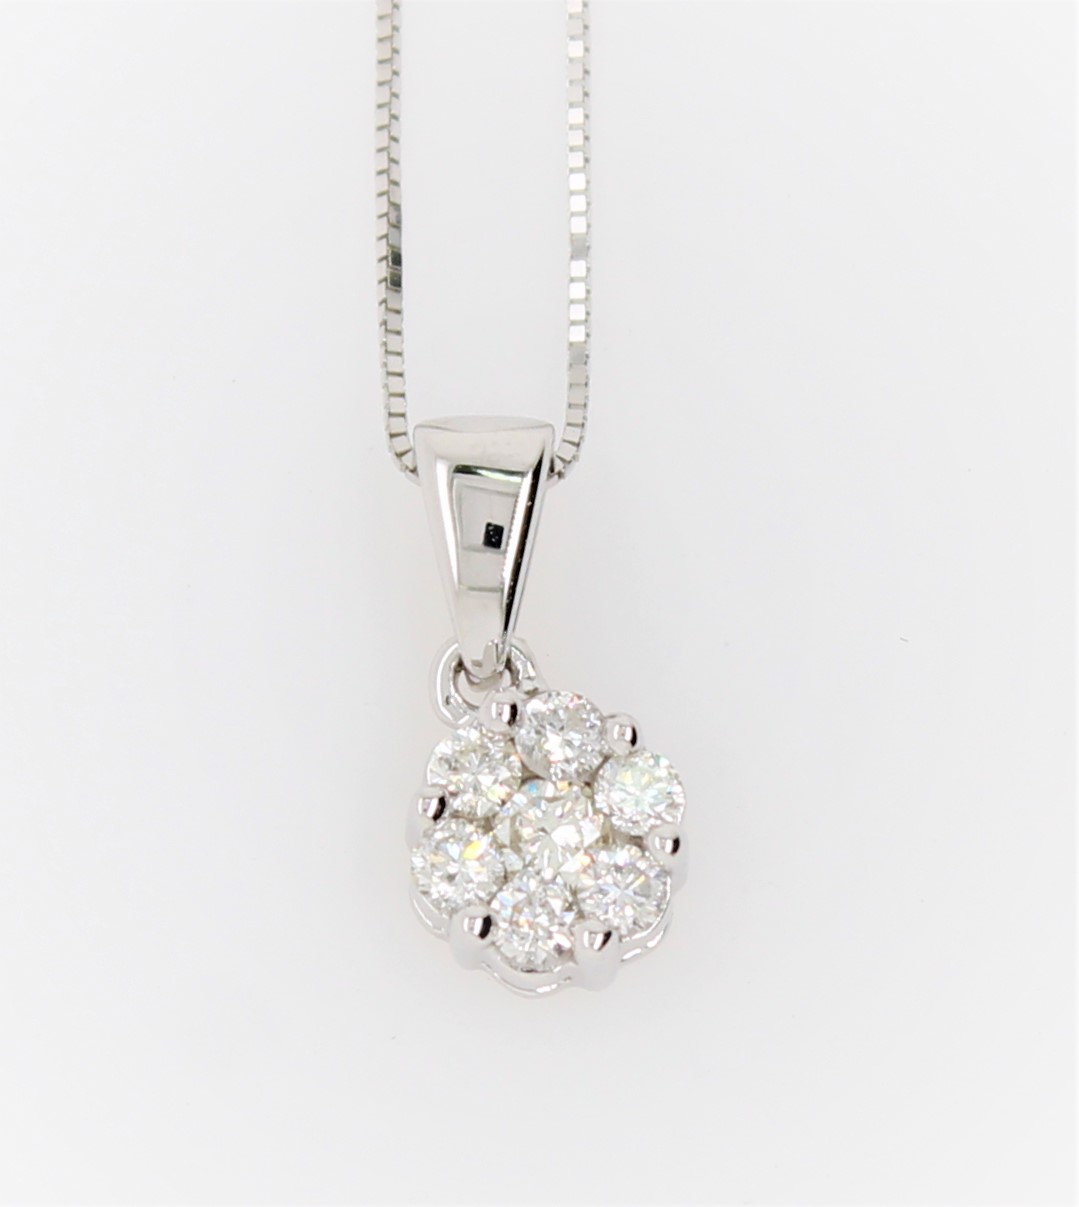 10 Karat White Gold Diamond Cluster Pendant Necklace In The 0.65 Carat Category